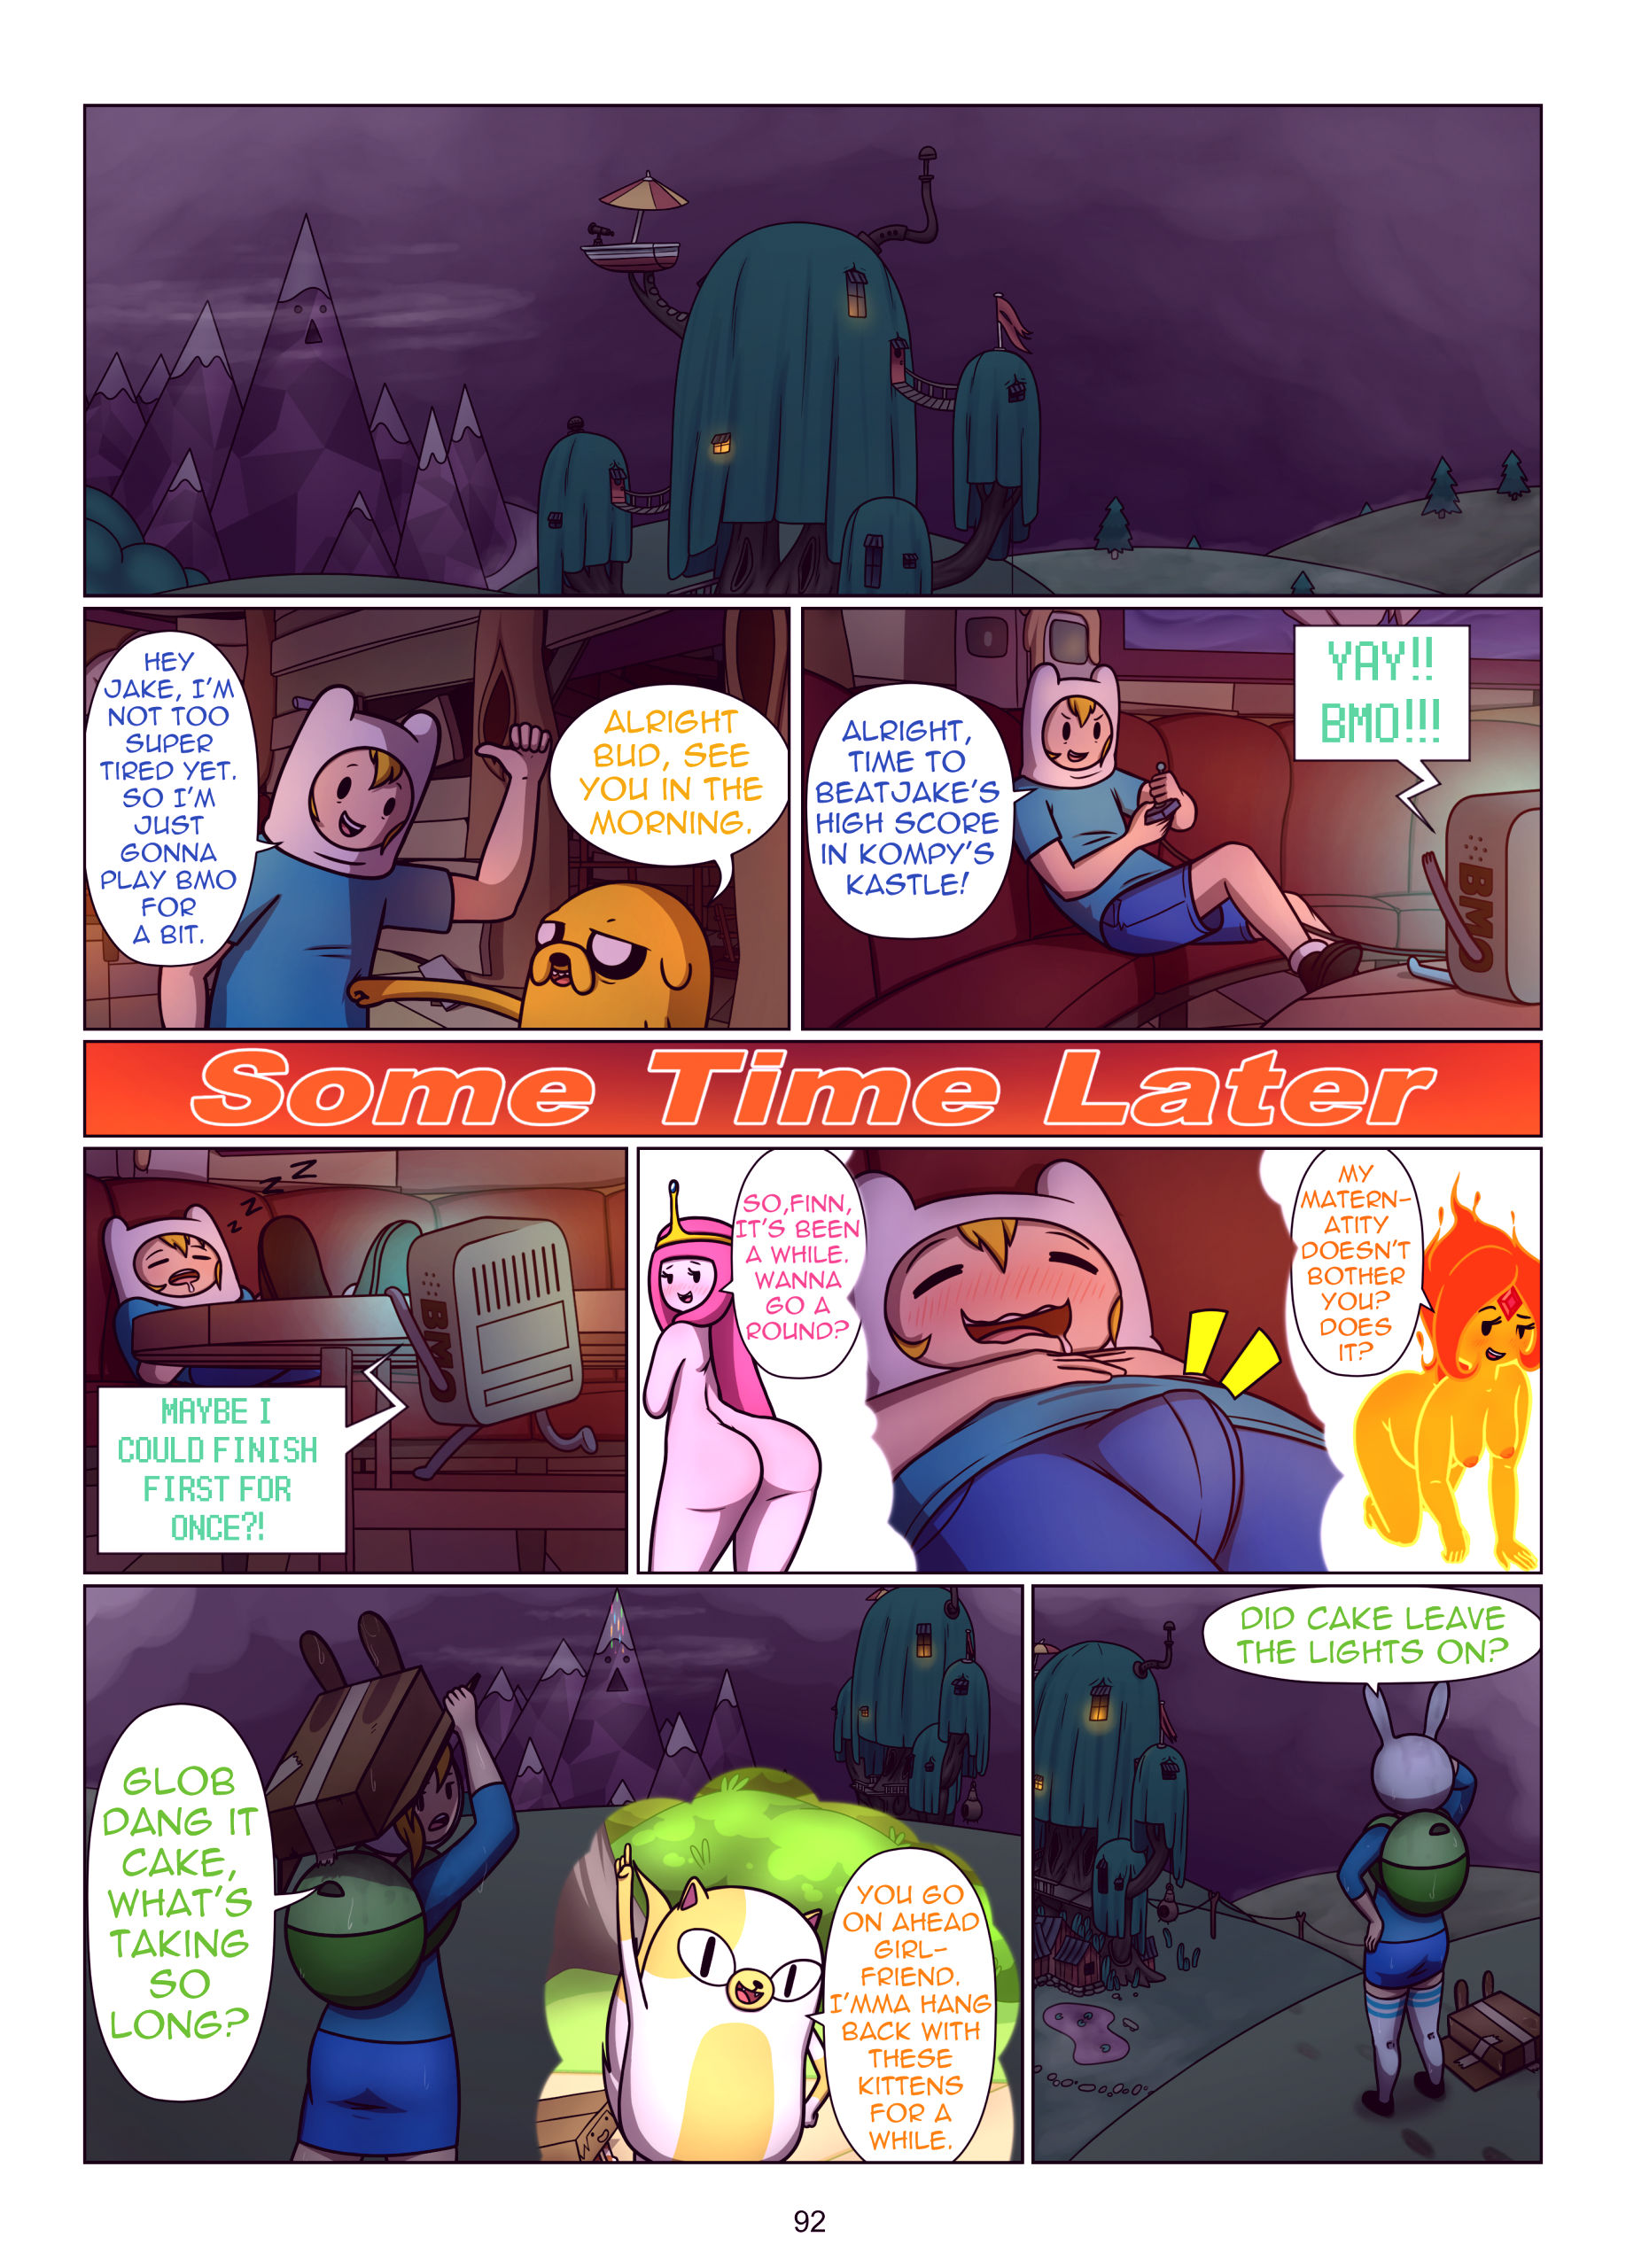 Misadventure time the collection porn comic picture 93